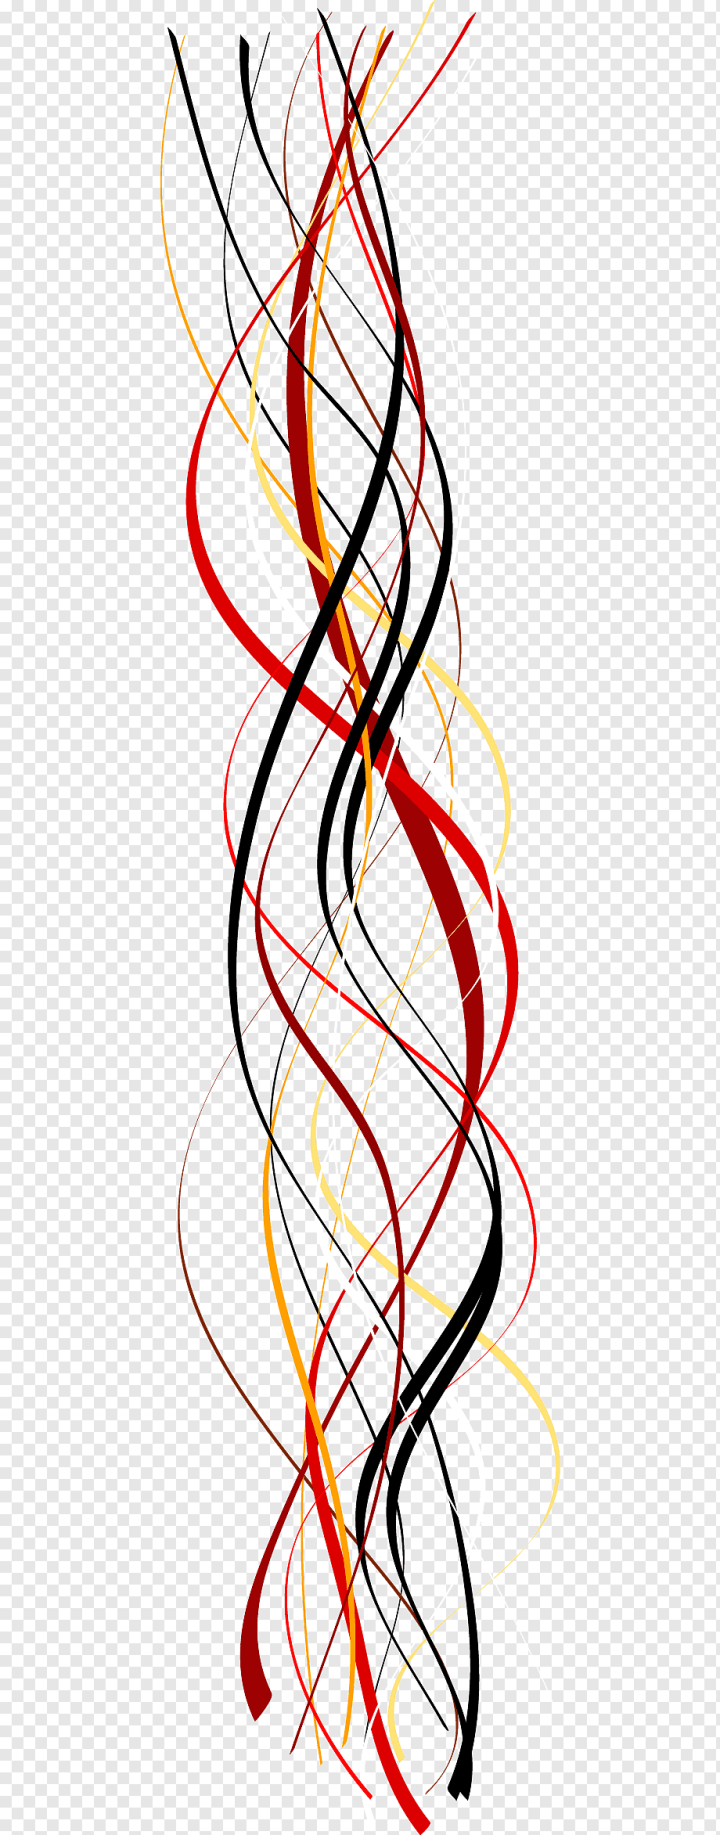 Curve Graphic design Red, Smoke curve background, red, yellow, and white,  blue, angle, text png